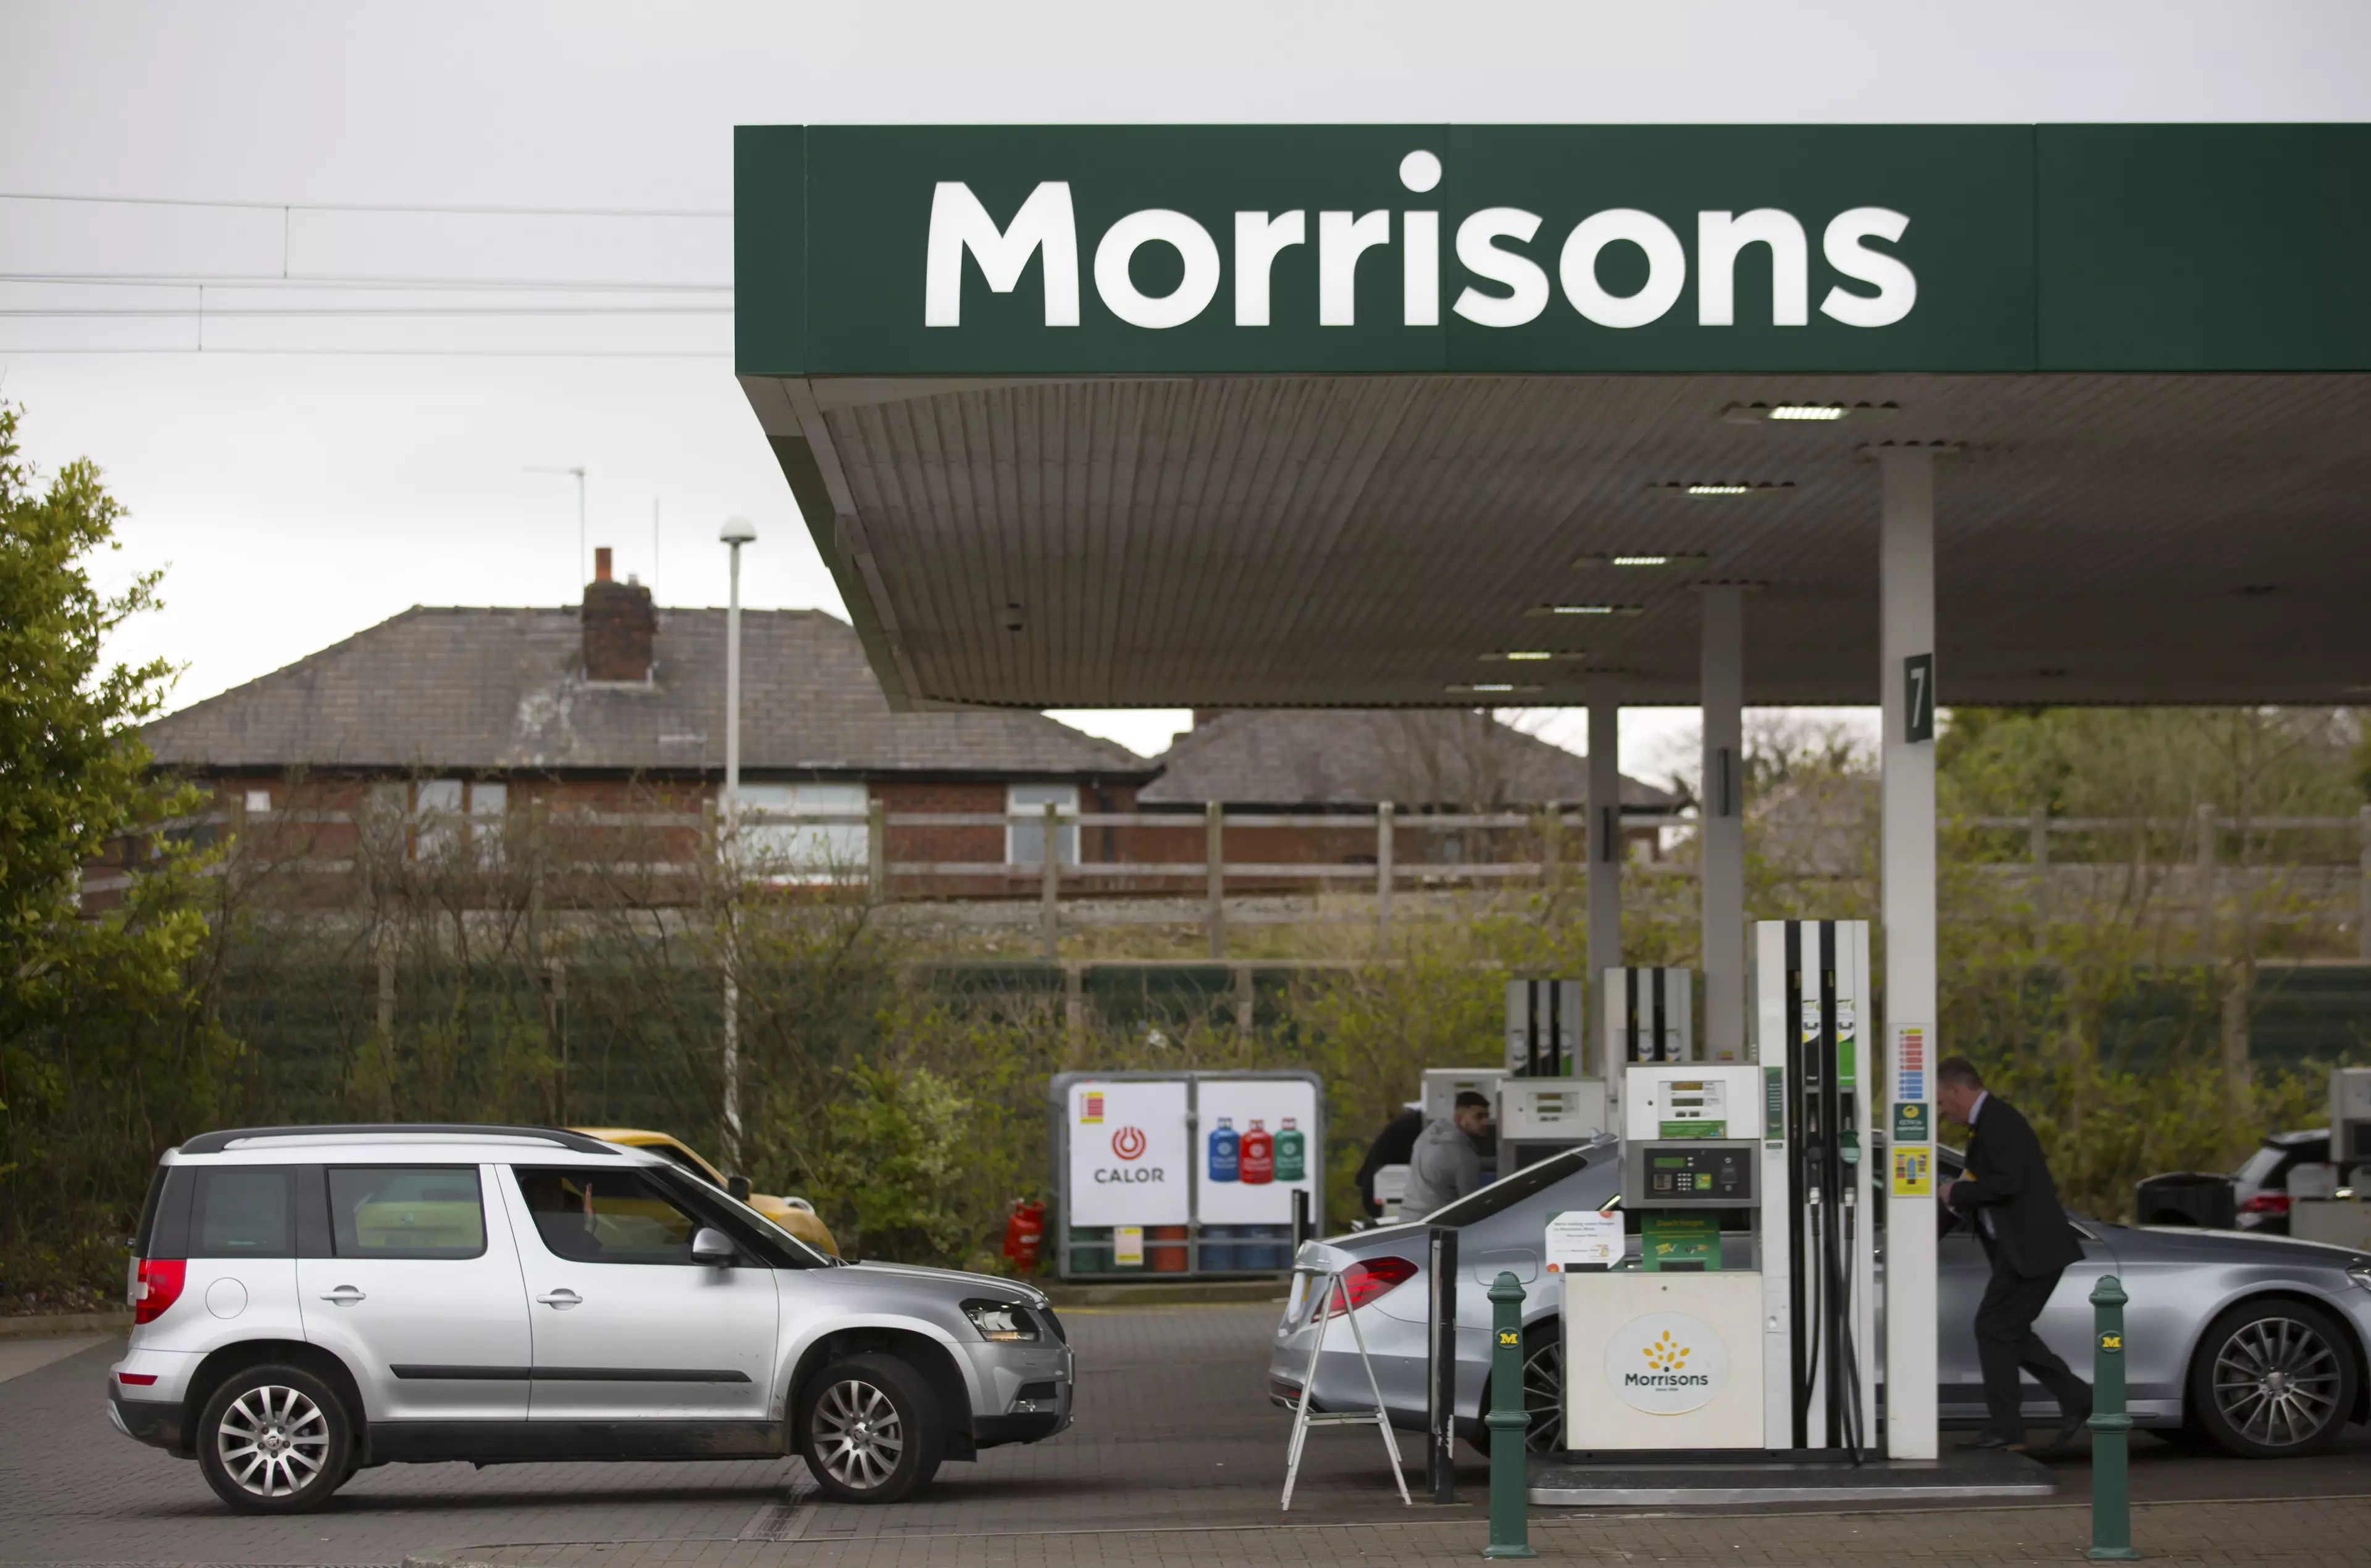 Morrison's has slashed the price of its petrol because of the coronavirus outbreak.